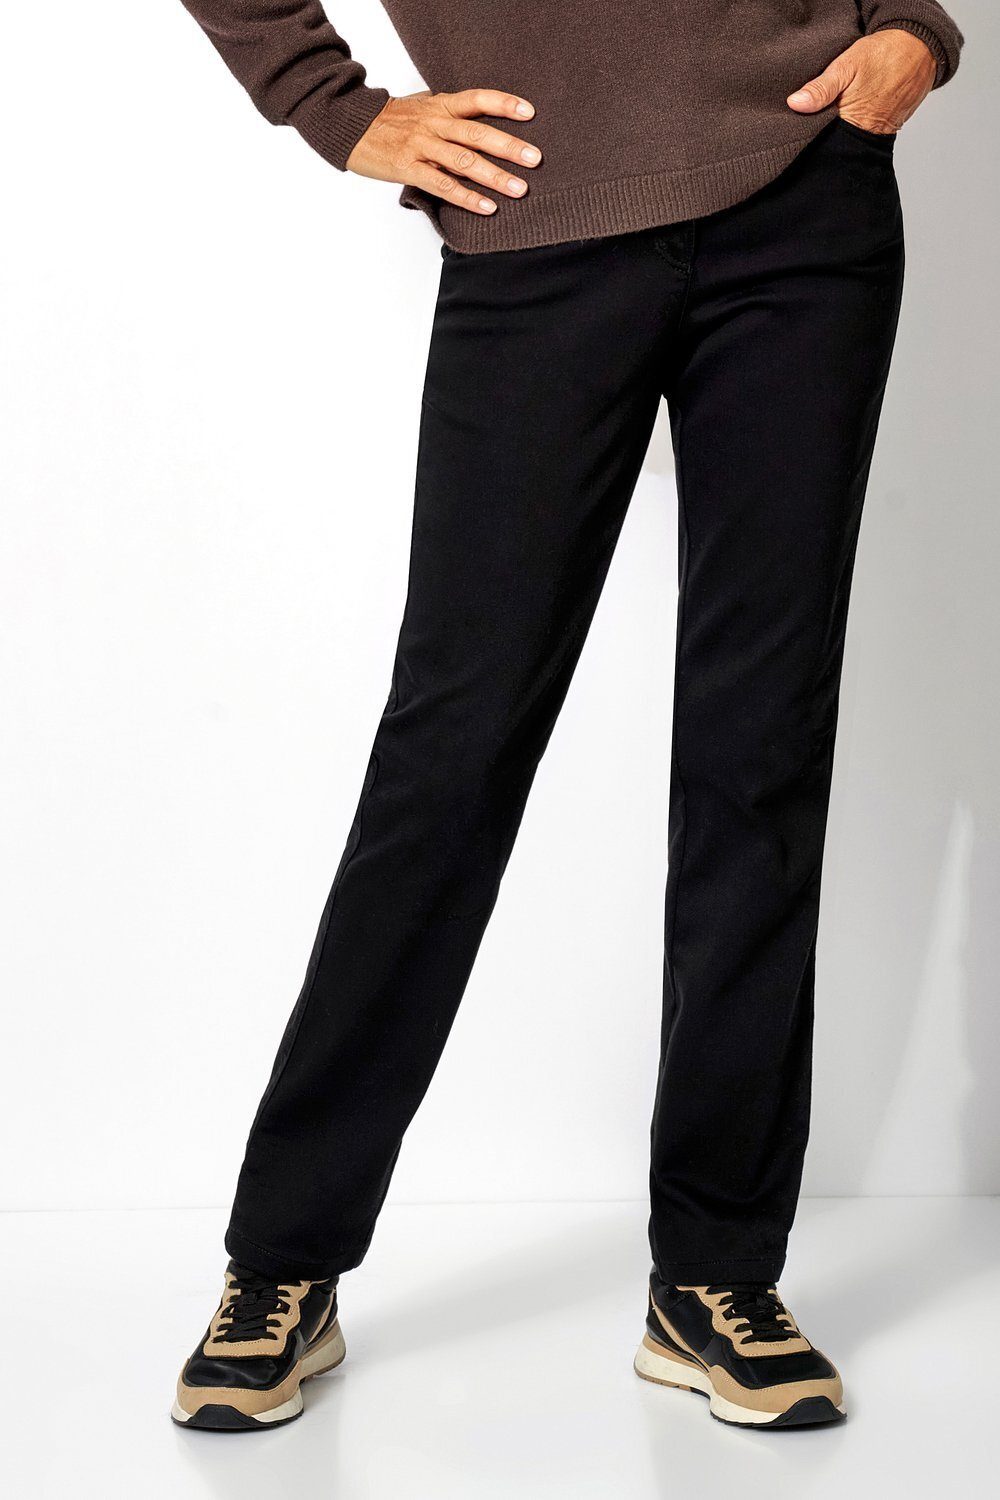 Relaxed by TONI in schwarz 891 My Passform - Love 5-Pocket-Hose legerer